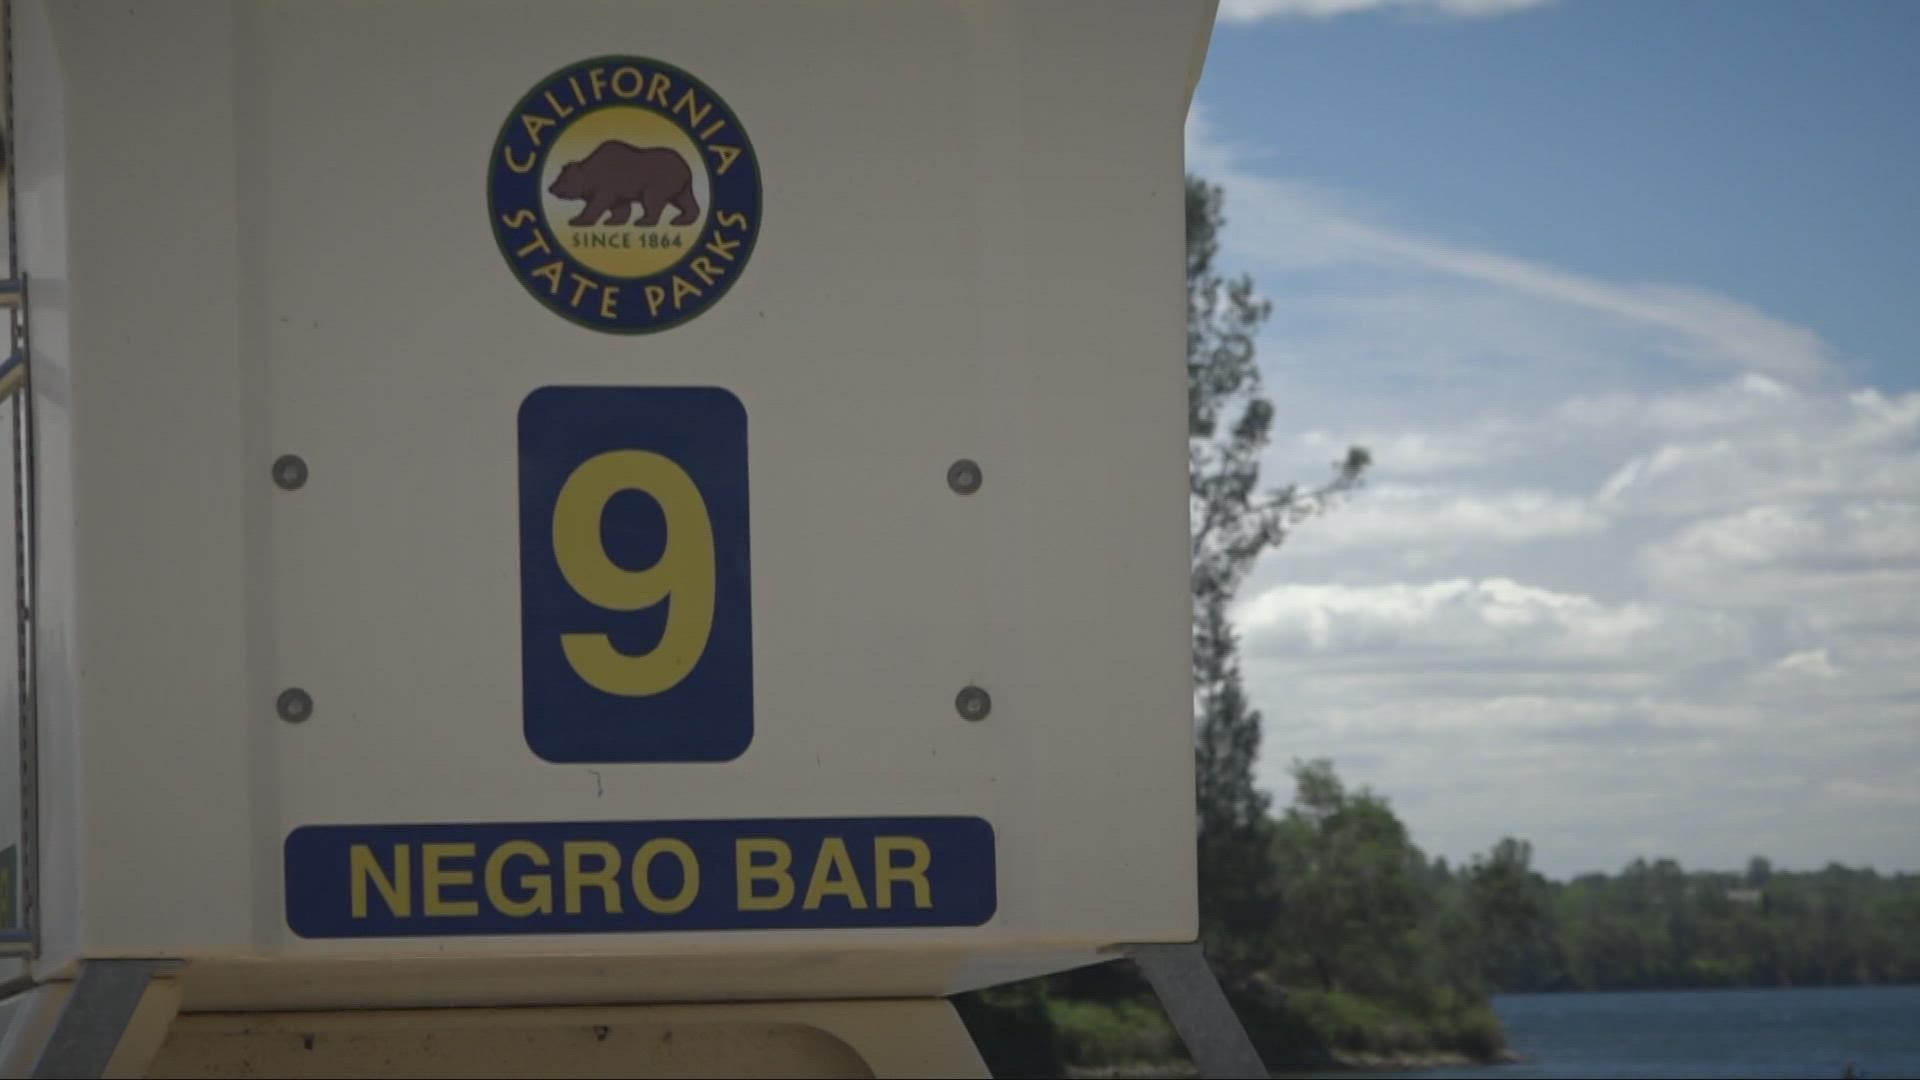 The California State Parks Commission decided to temporarily rename the park "The Black Minors Bar," which commissioners say honors the historic area.